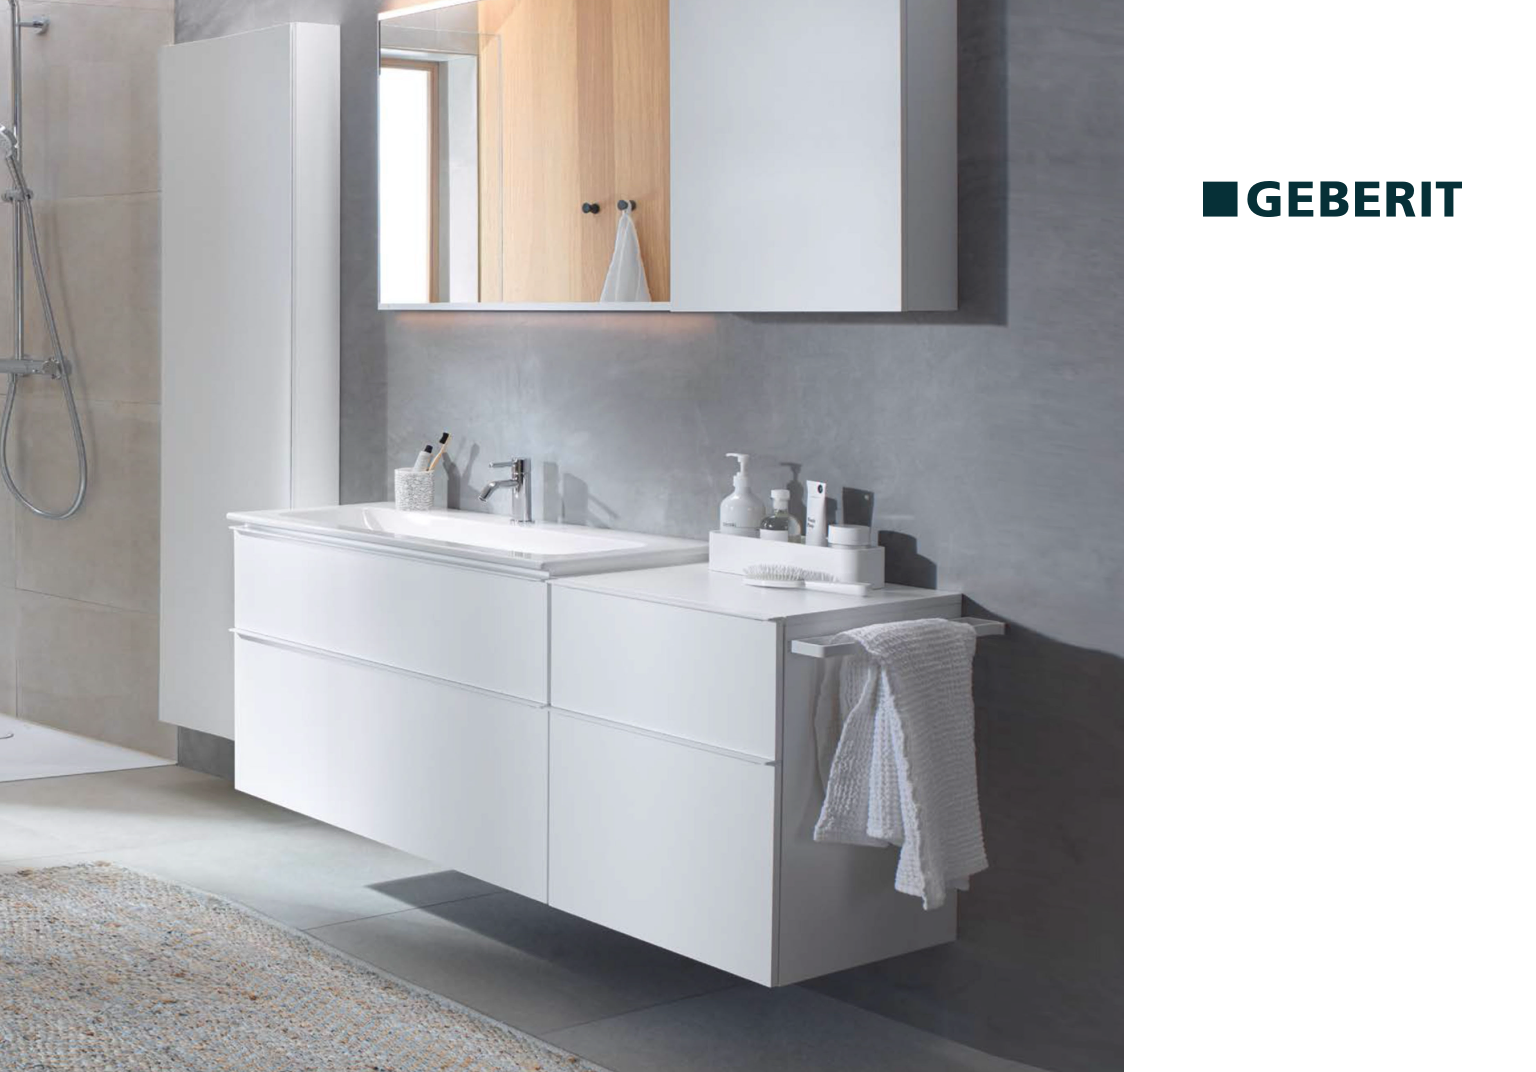 Geberit is a Swiss multinational group specialized in manufacturing and supplying sanitary parts and related products.